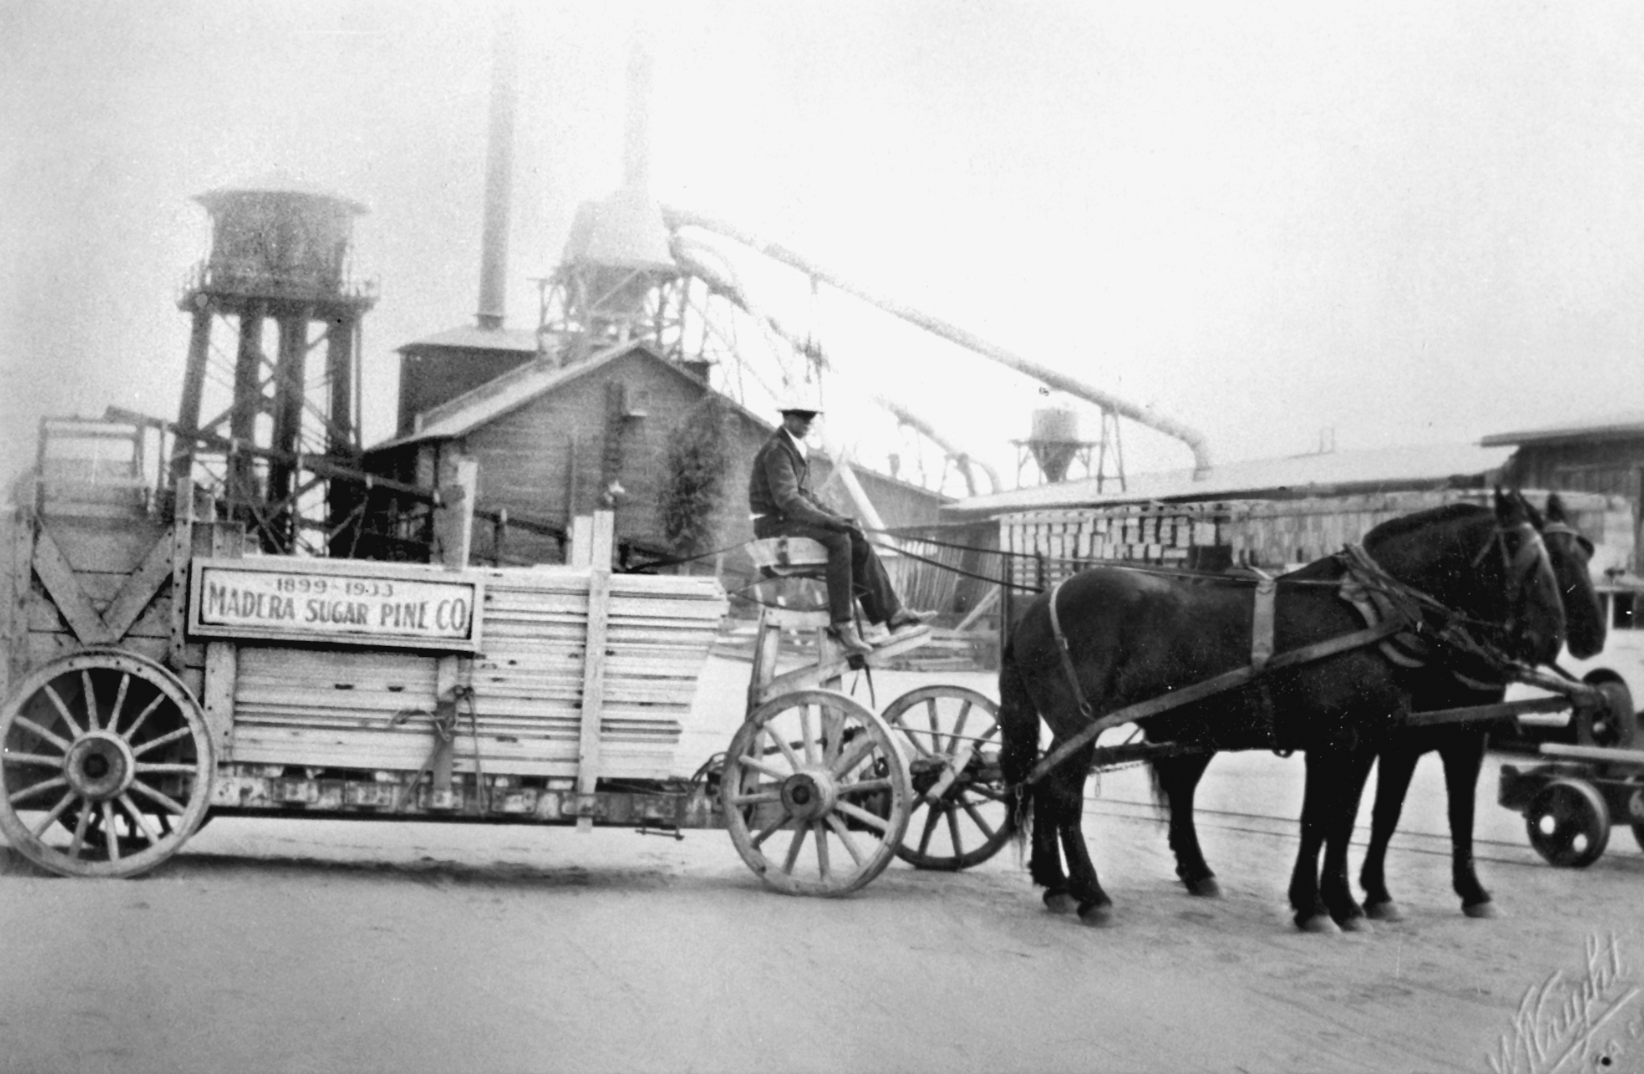 The Madera Sugar Pine Lumber company was the economic force that brought Madera into the 20th century after the town almost died in its infancy in the 19th century. By the time the Great Depression shut down its mills in 1933, agriculture had emerged to give Madera the strength it needed to survive.